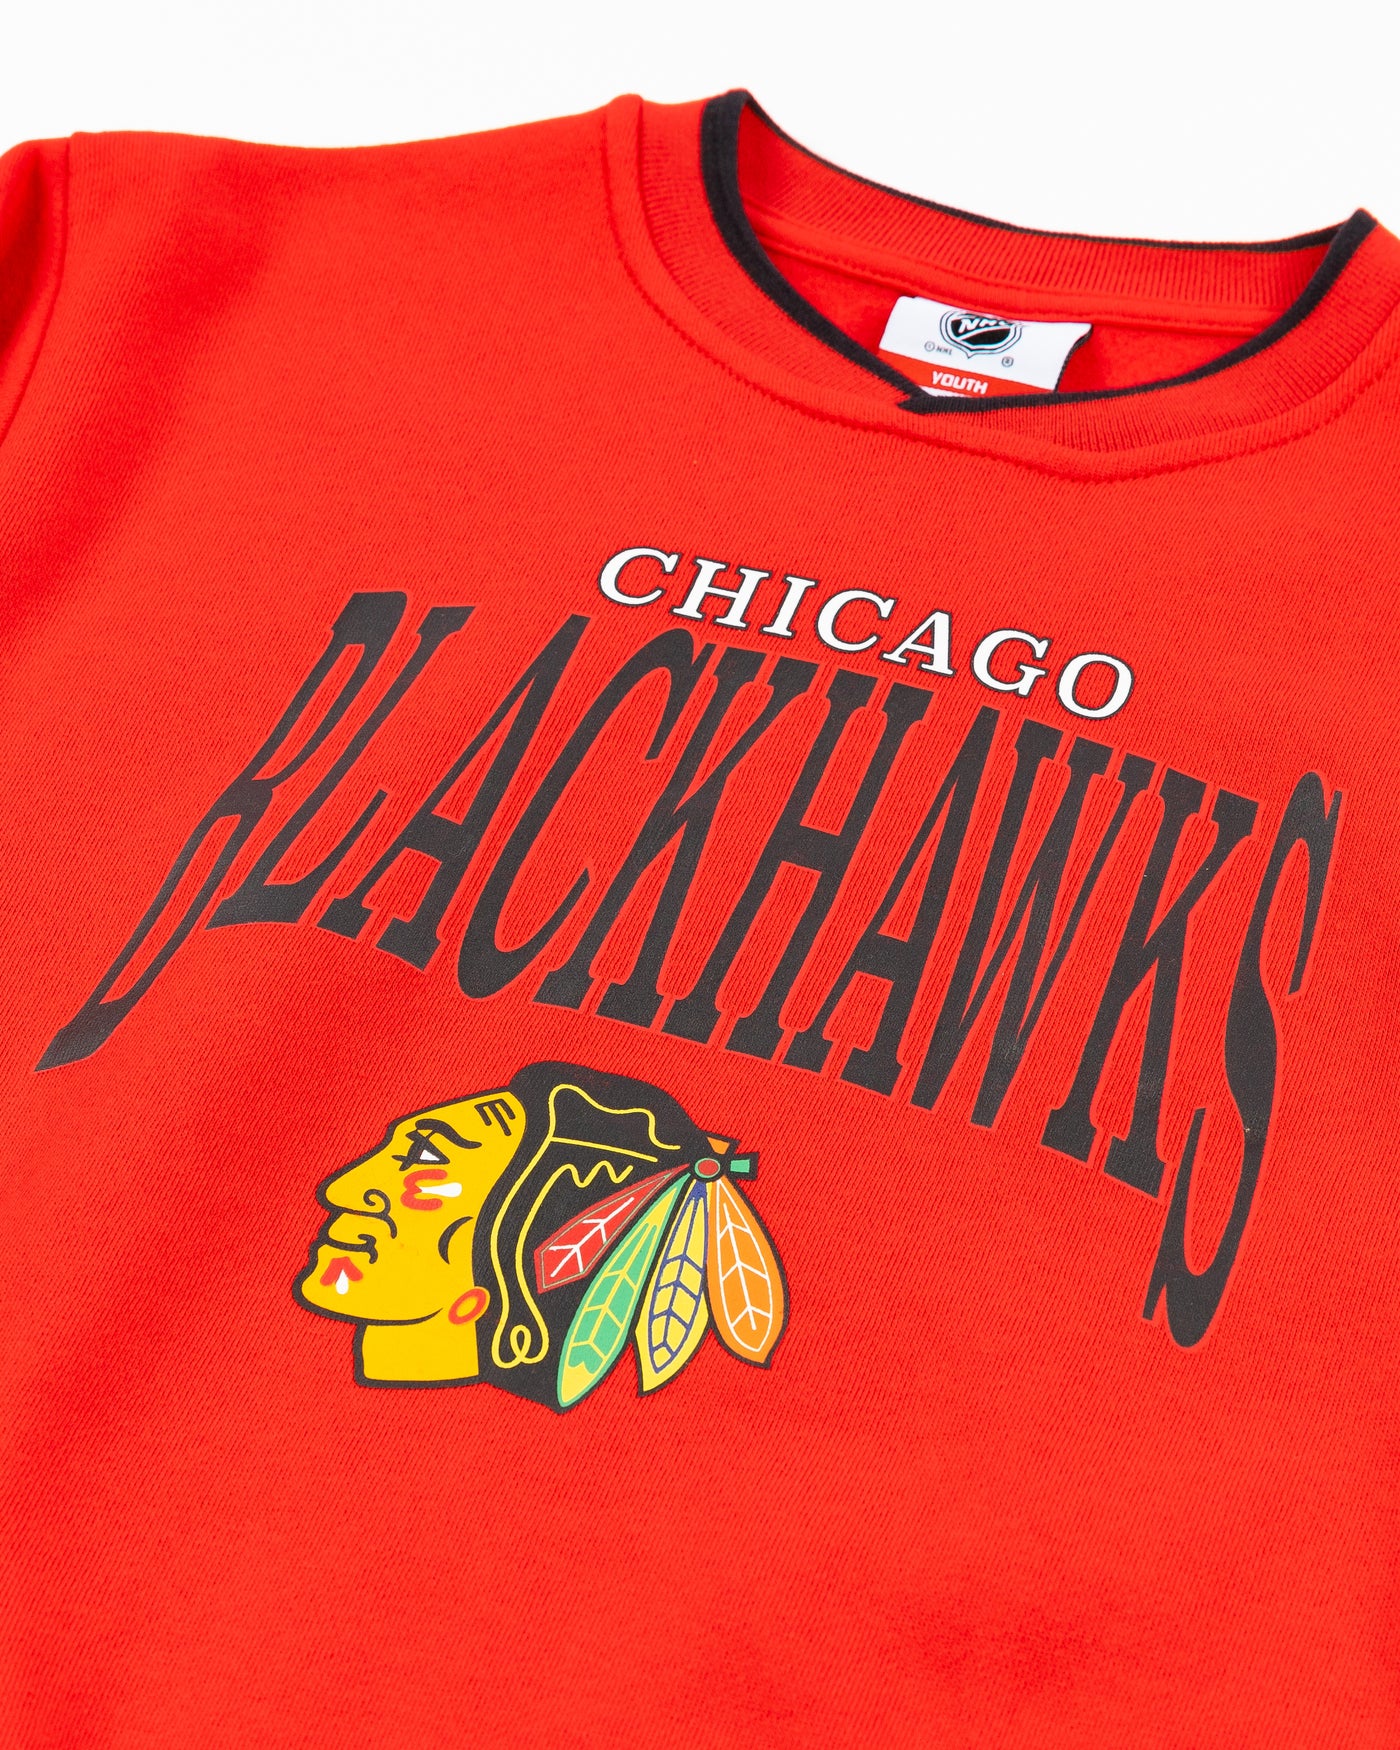 red youth crewneck sweater with Chicago Blackhawks wordmark and primary logo on front - detail lay flat